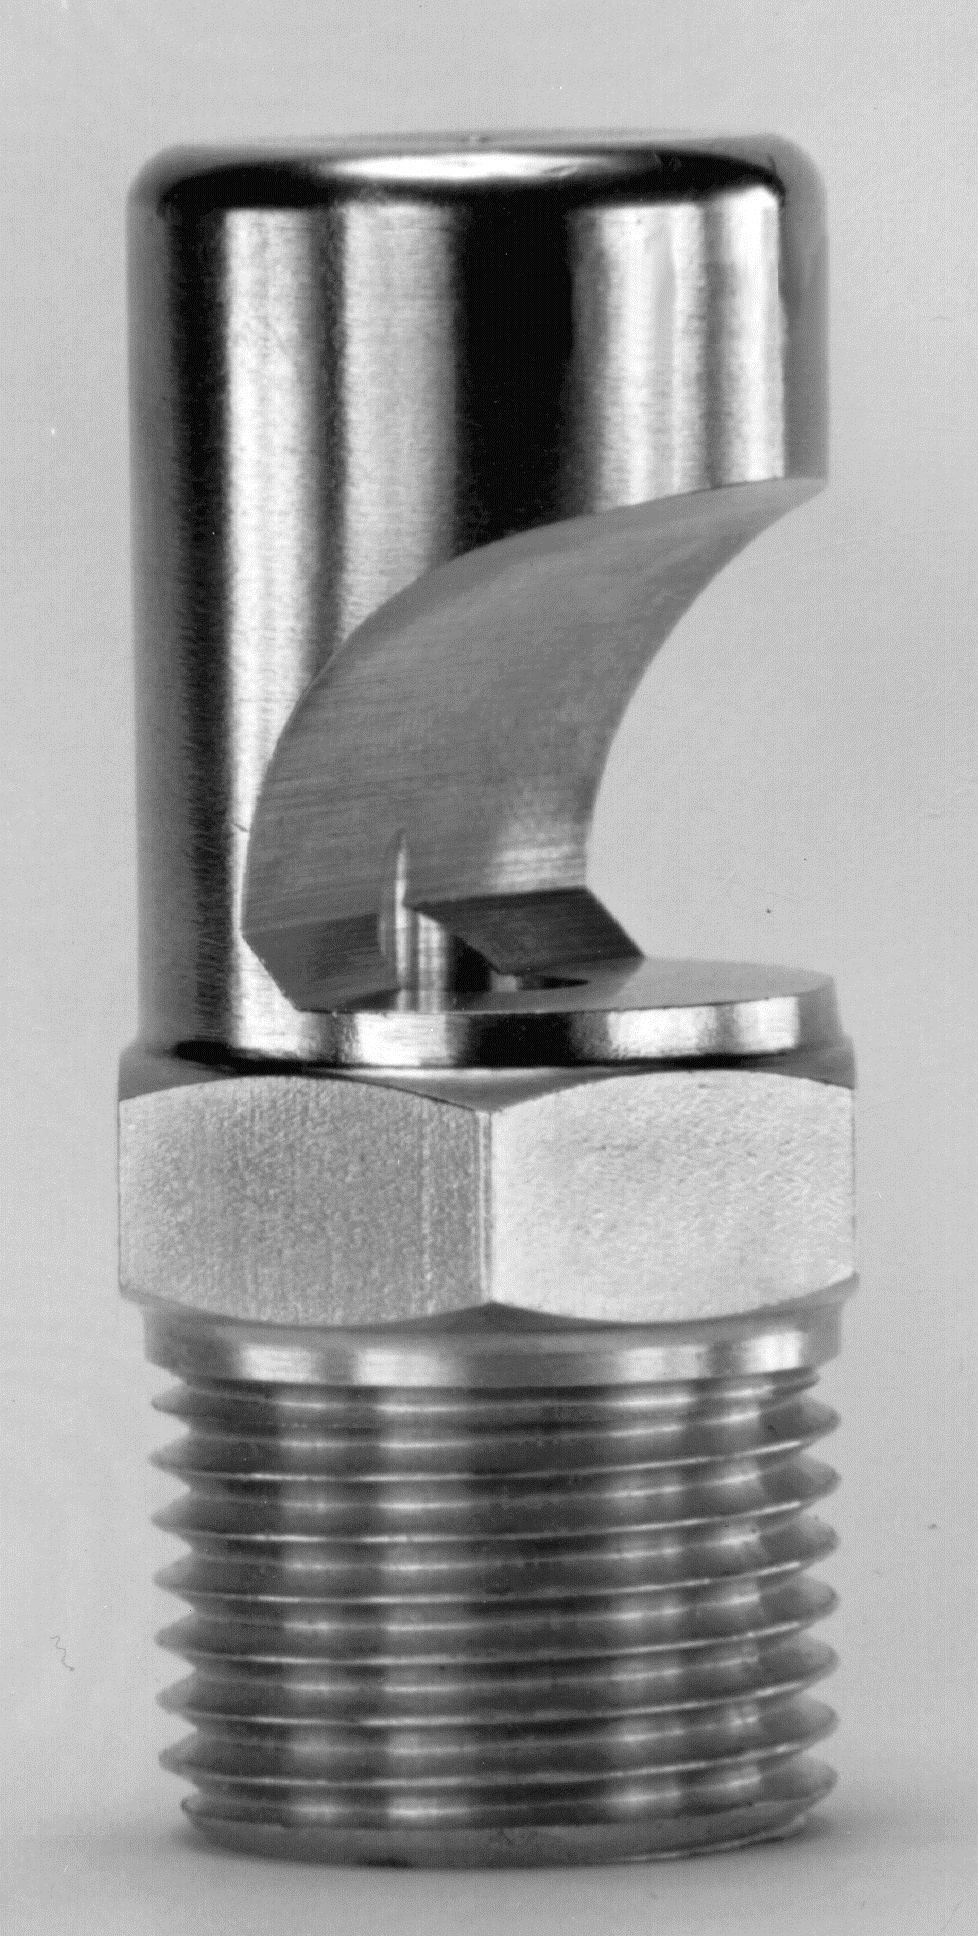 BETE Fog Nozzle's AFF Series - Deflected Flat Fan and (Extra) Wide Angle Nozzles for Fire Protection.